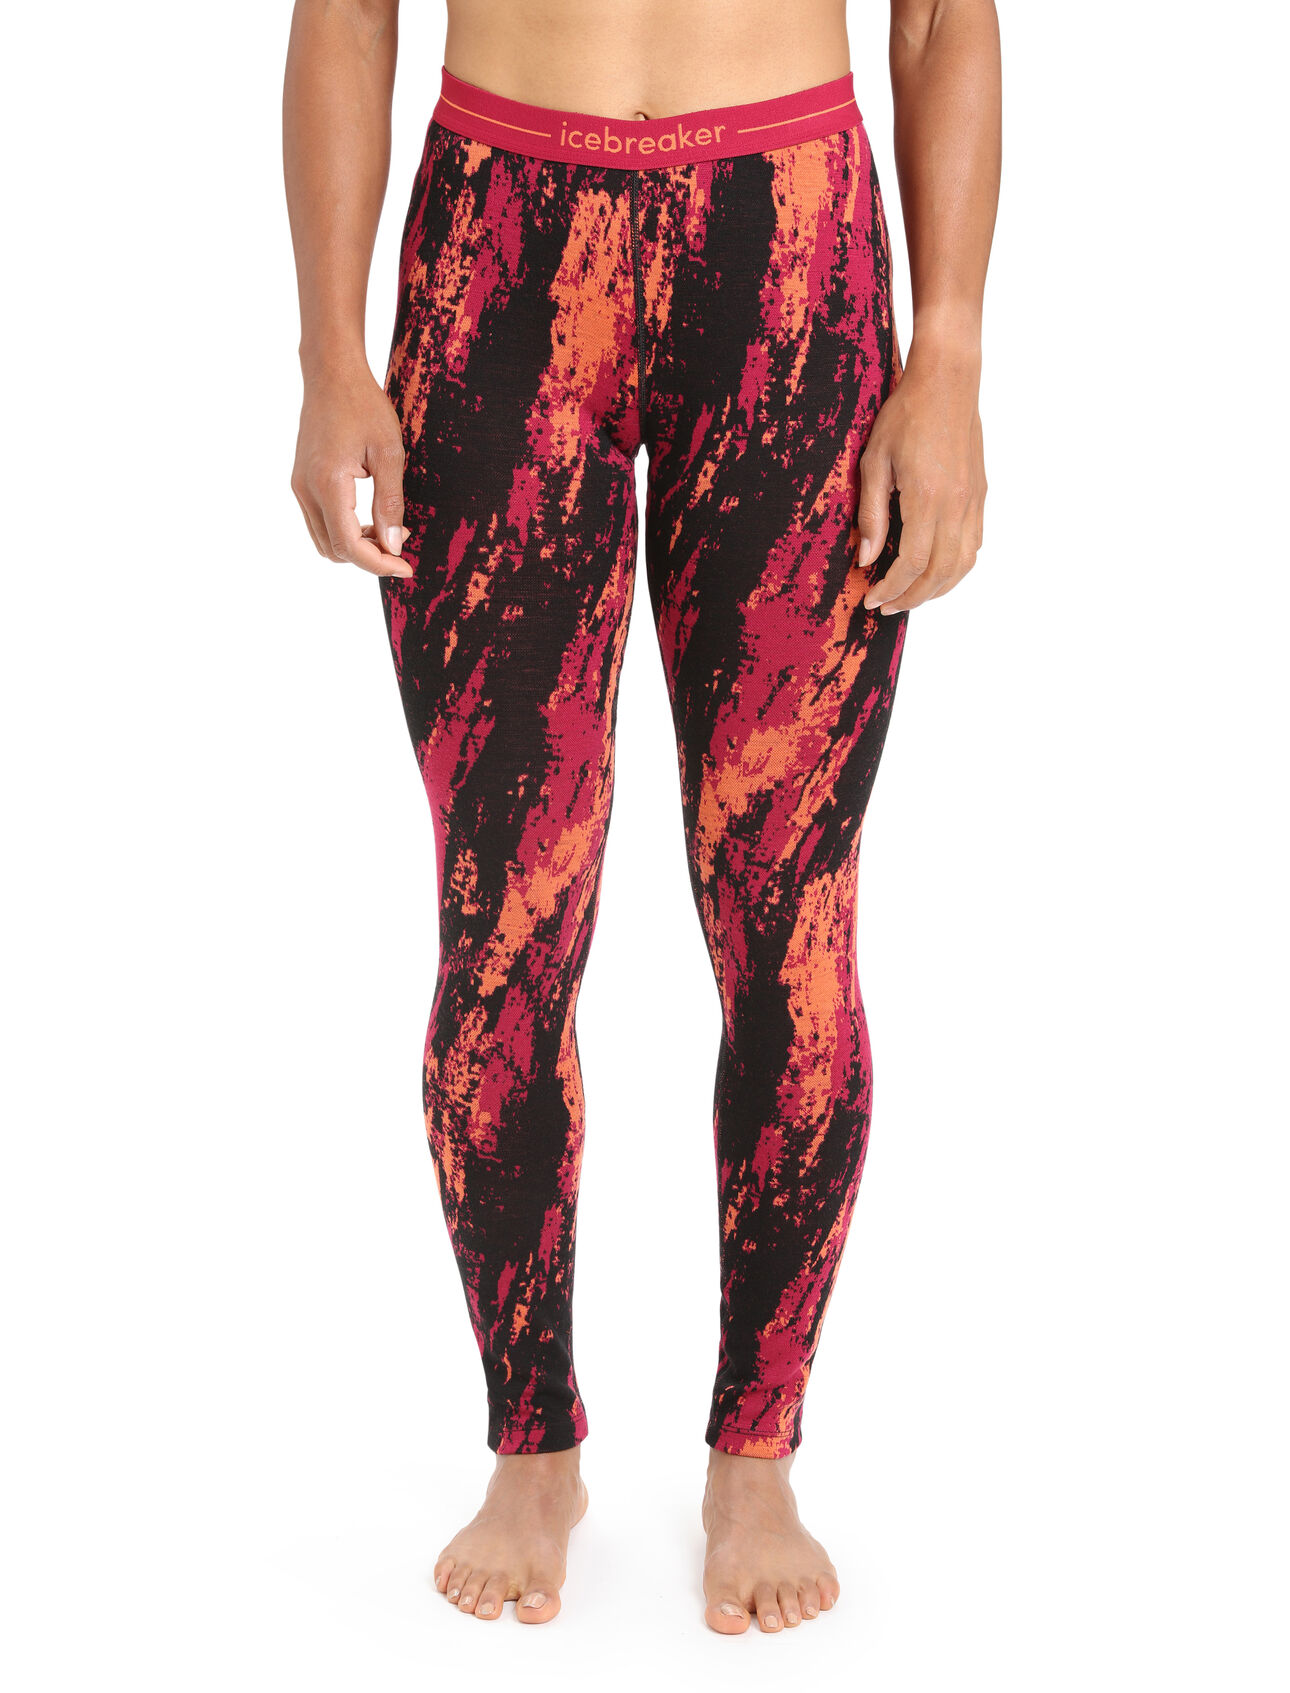 Womens Merino 250 Vertex Thermal Leggings Sedimentary Incredibly warm merino base layer bottoms with a unique jacquard pattern, the 250 Vertex Leggings Sedimentary are a go-to piece for winter layering—ideal for skiing, snowshoeing and other cold-weather pursuits. The all-over graphic print draws inspiration from the geologic layers of the world's mountains.